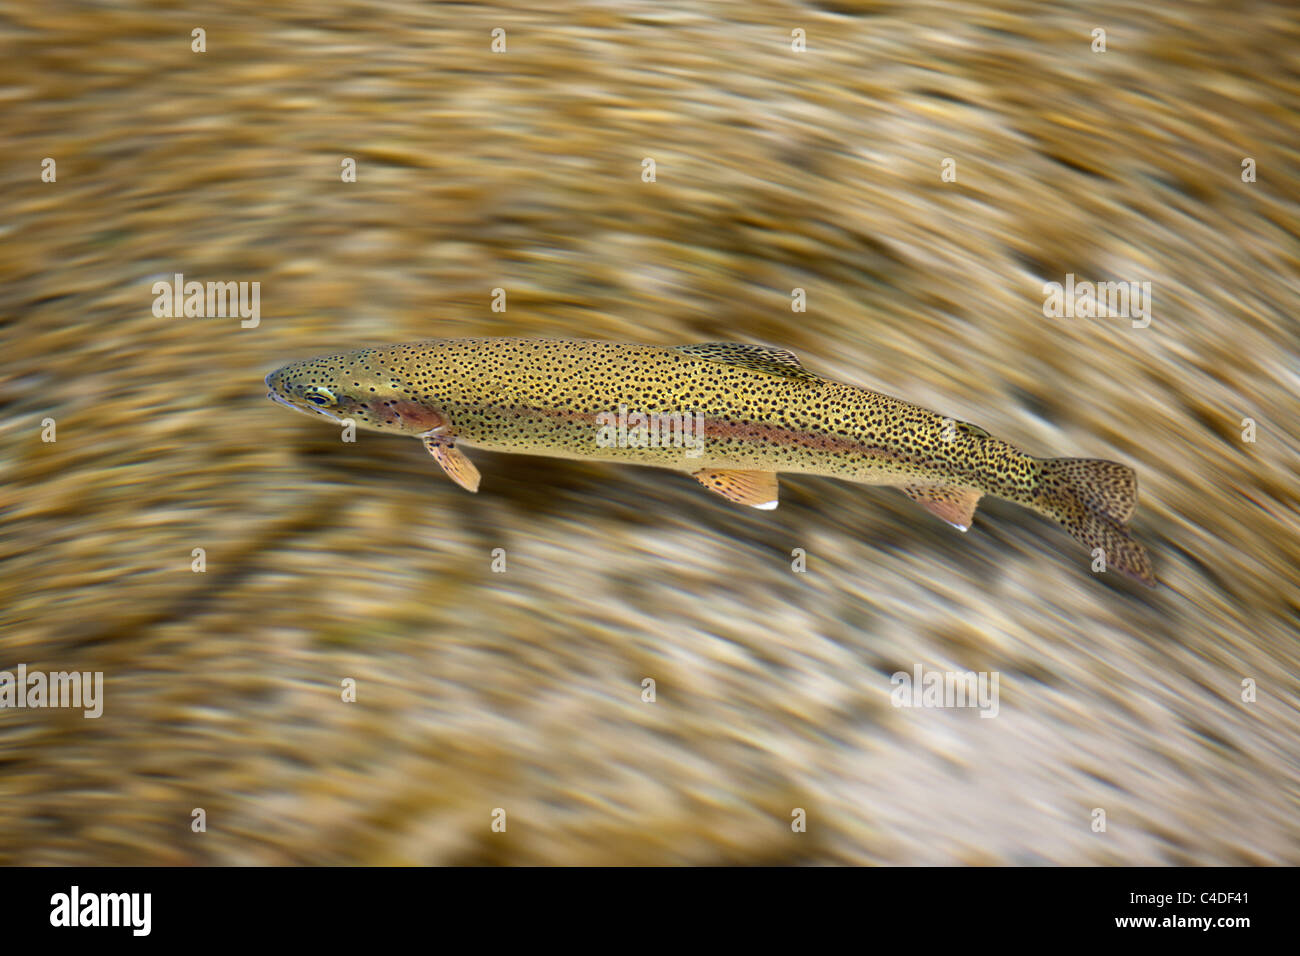 Wild rainbow trout (Oncorhynchus mykiss) swimming at the surface of an Auvergne river (Puy de Dôme - France). Stock Photo